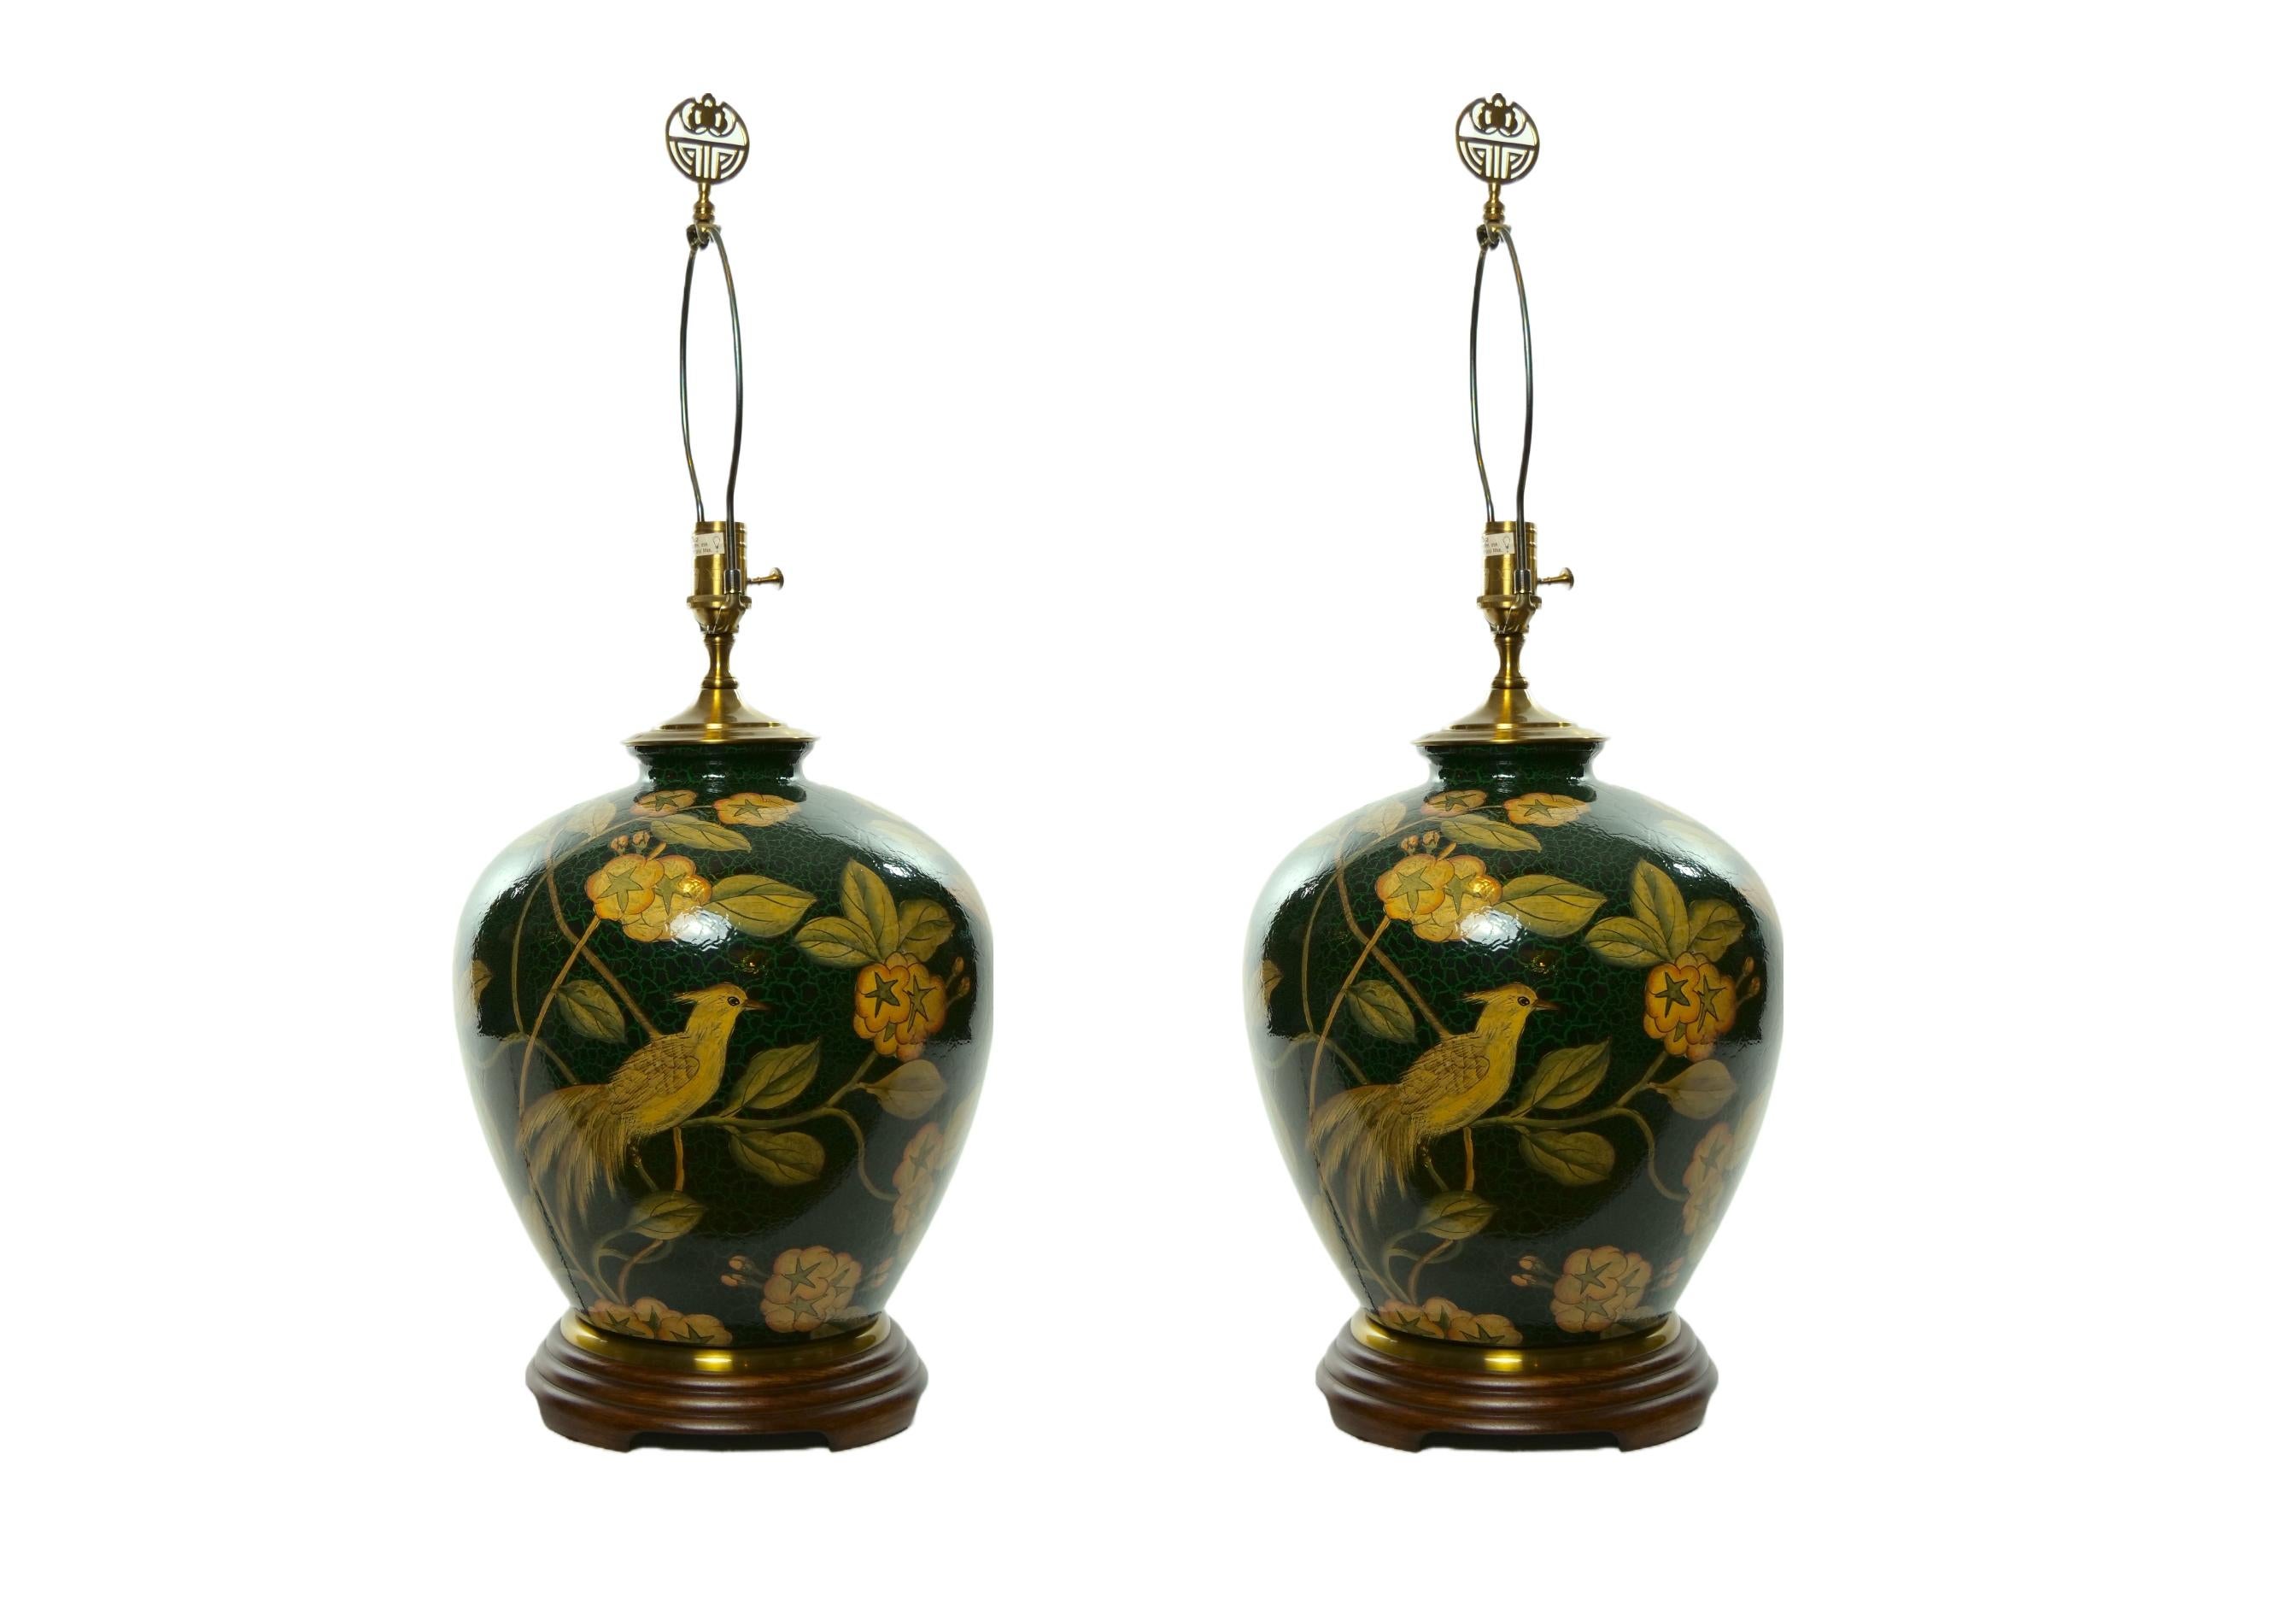 Pair glazed porcelain with wood base decorative ginger jar vases mounted as table lamps with exterior hand painted flower blossom and birds decoration design details. Each lamp is in good working condition. Minor wear consistent with age / use. No